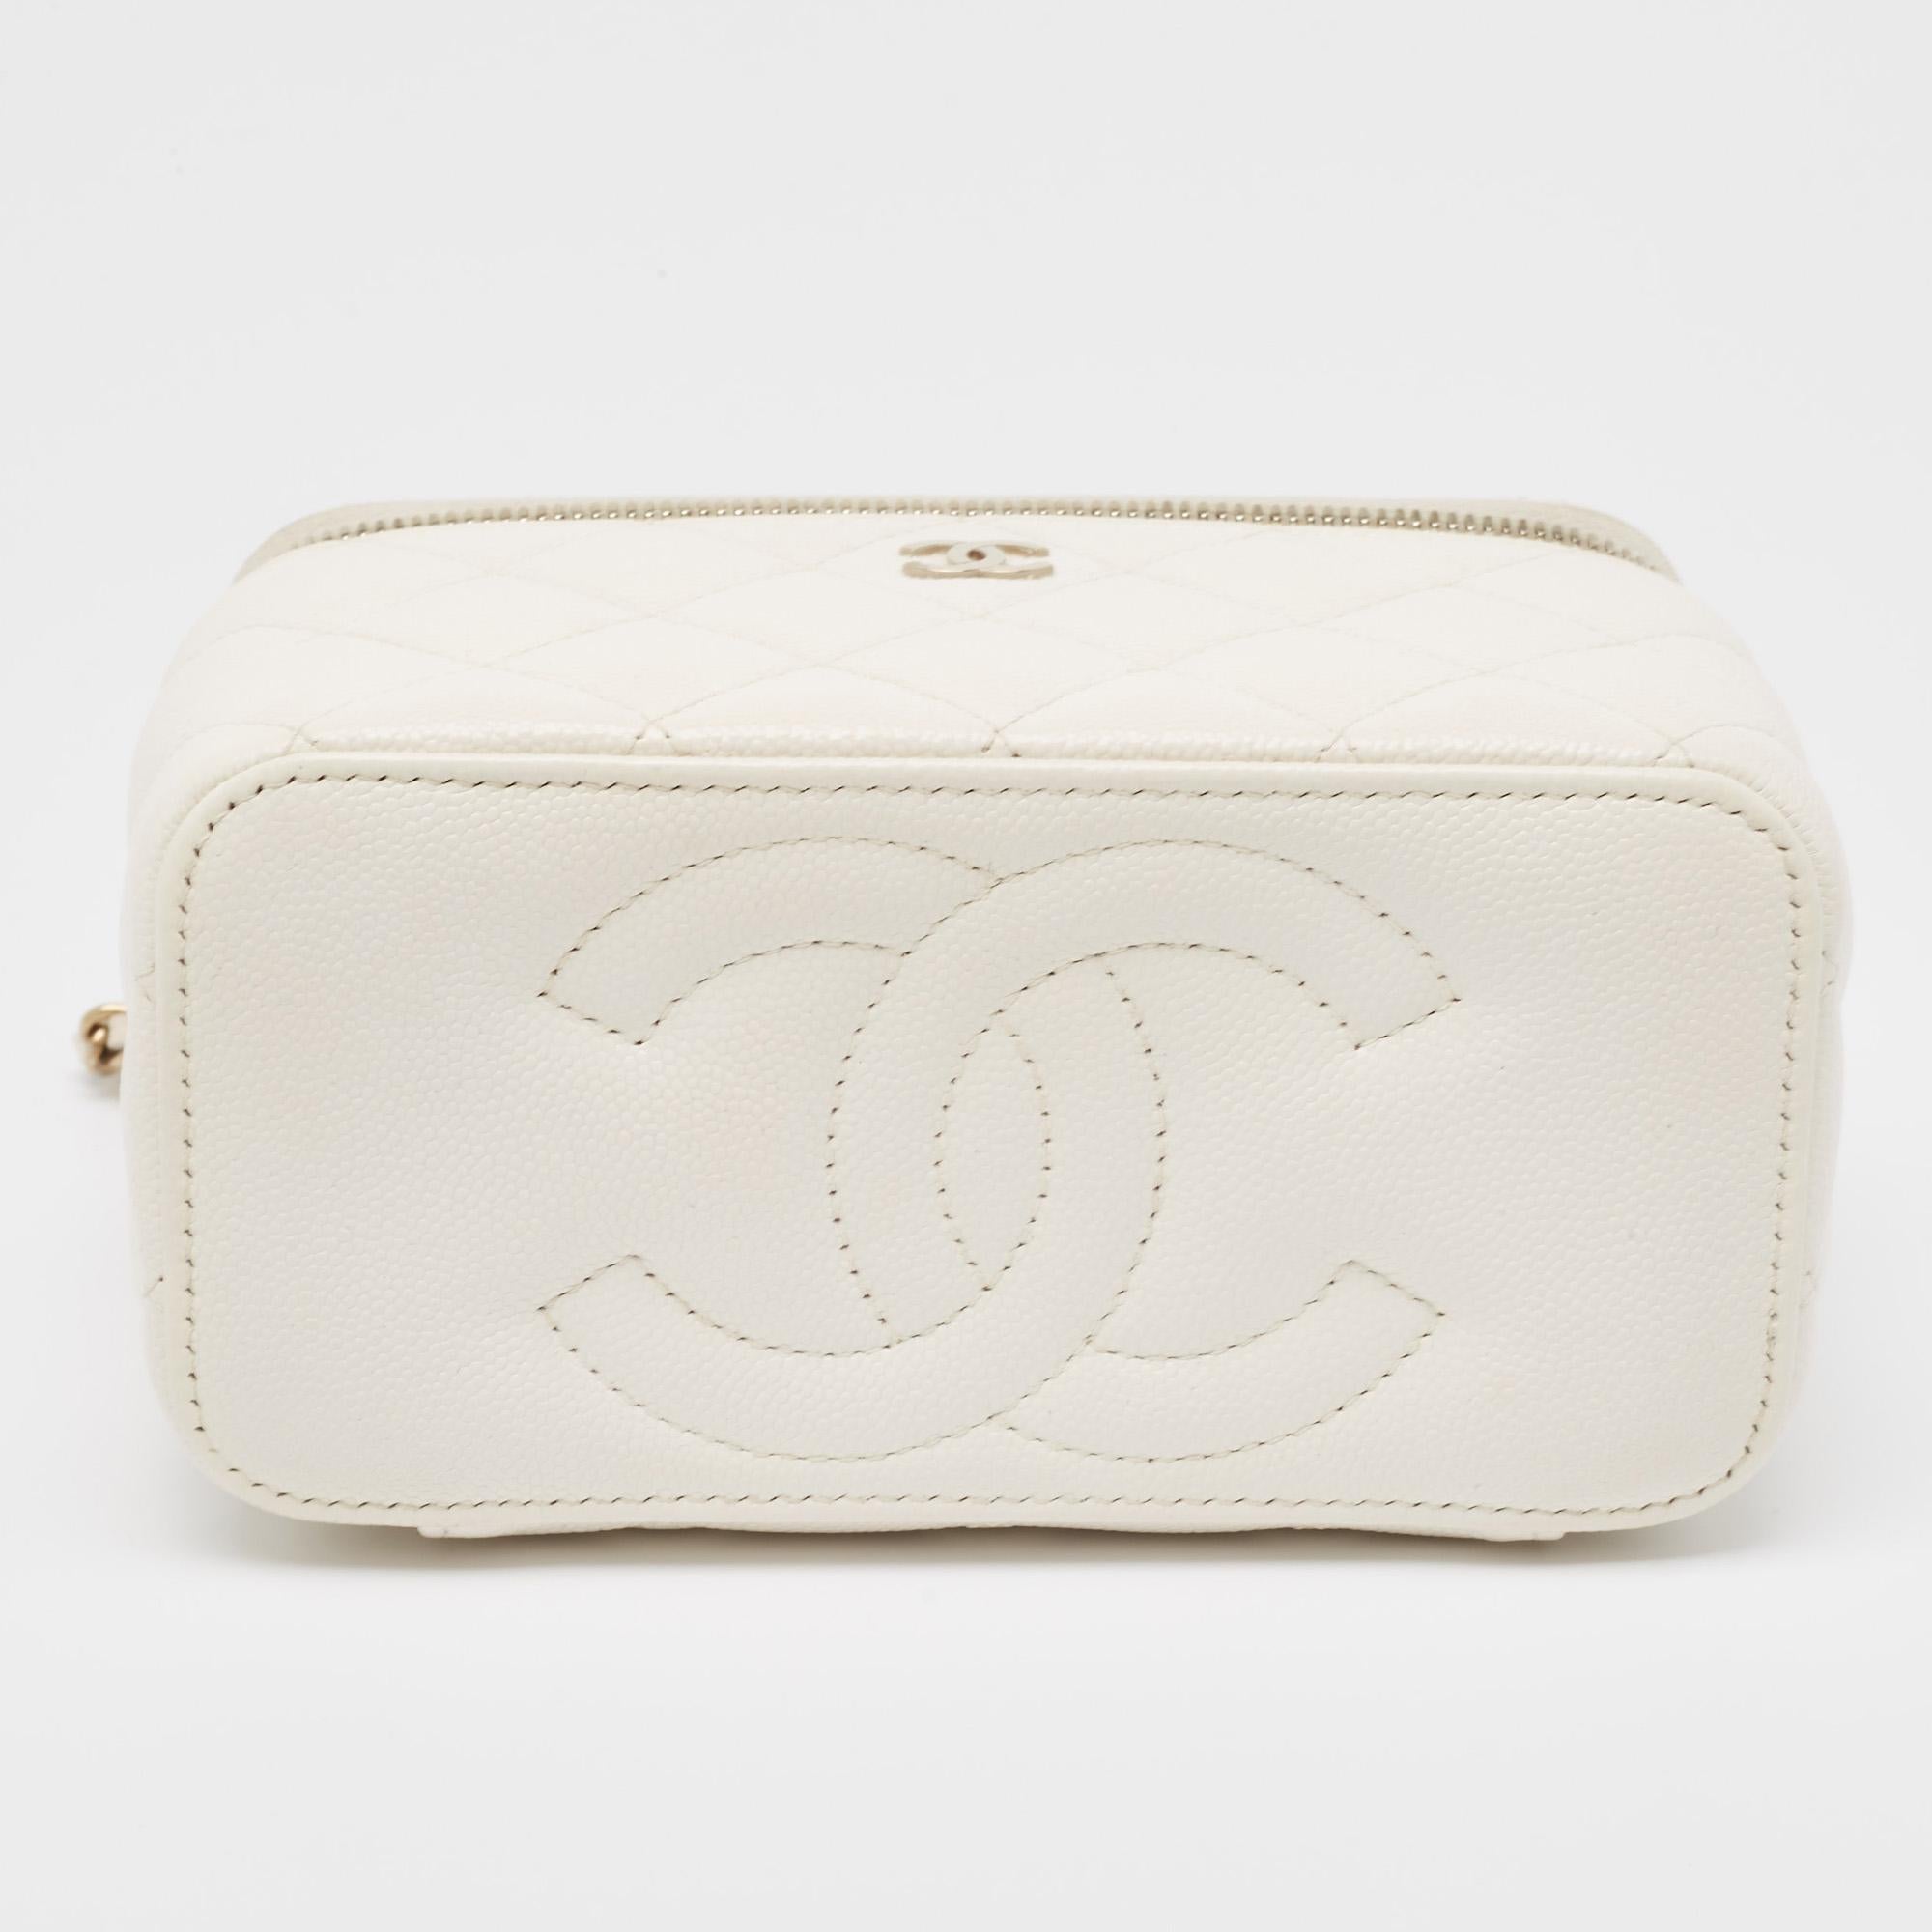 Chanel White Quilted Caviar Leather Small CC Vanity Case Bag 6